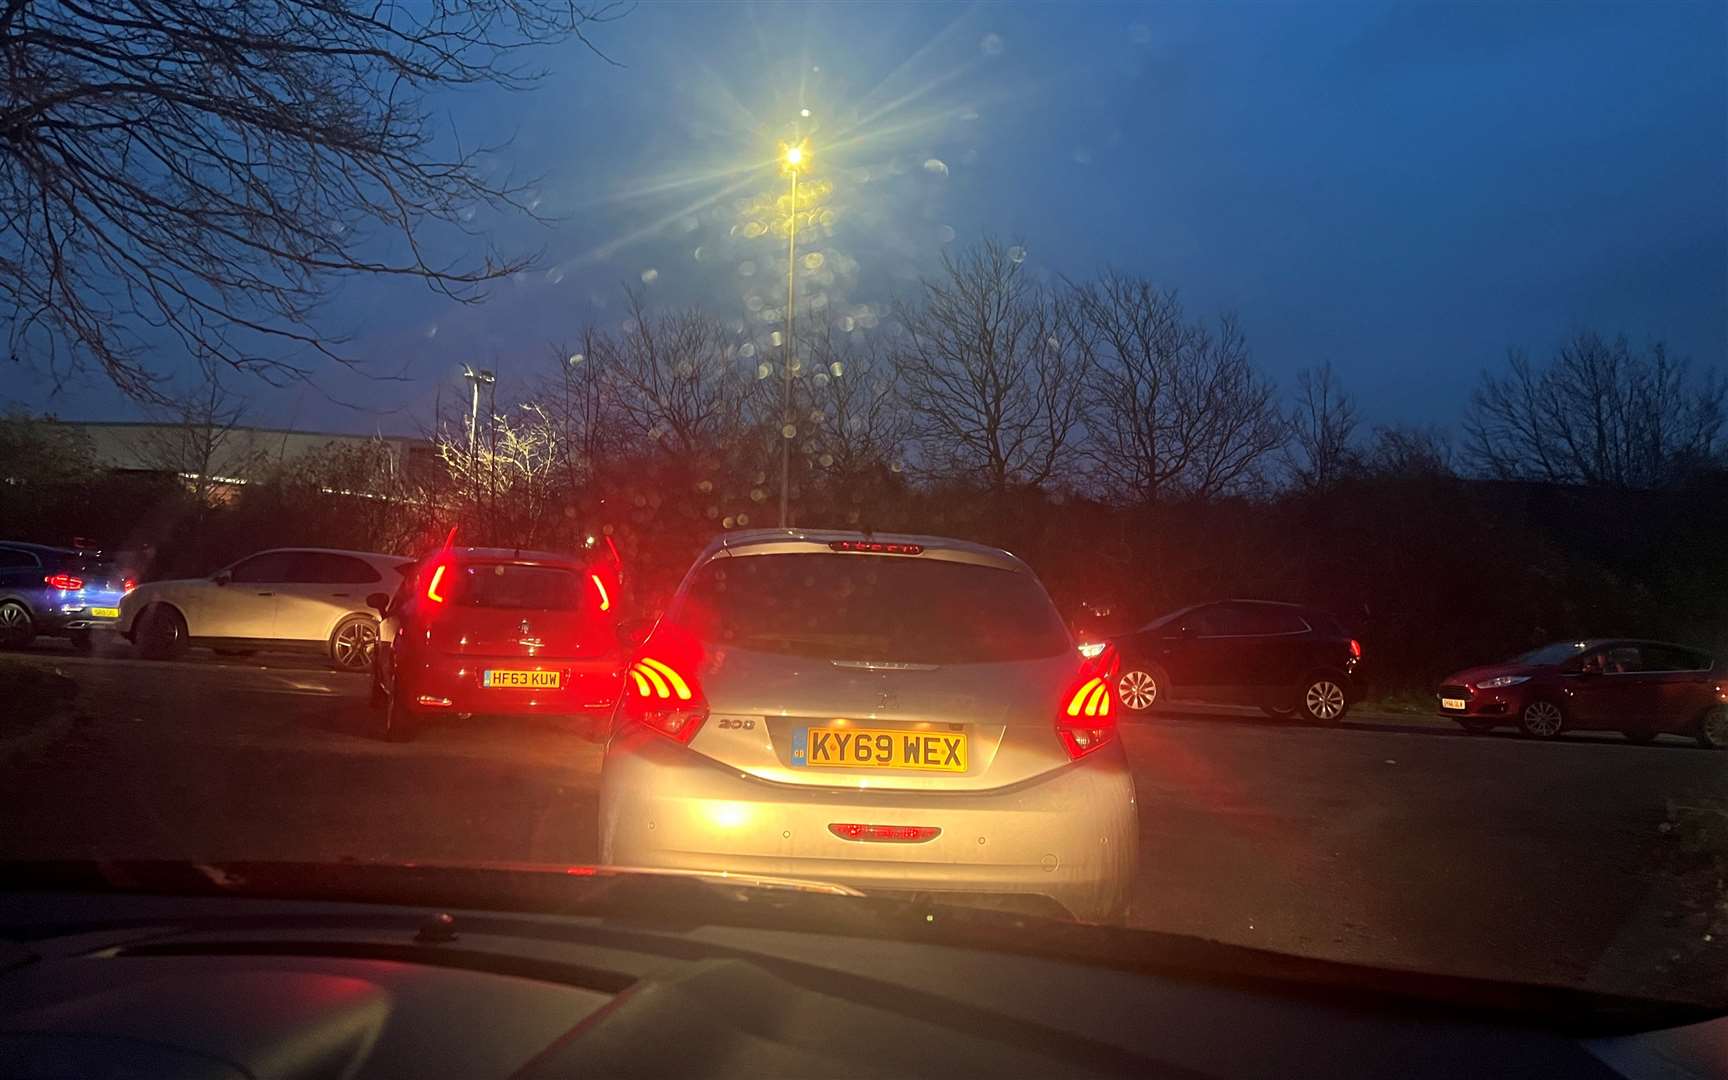 Huge queues trying to get off the Medway City Estate